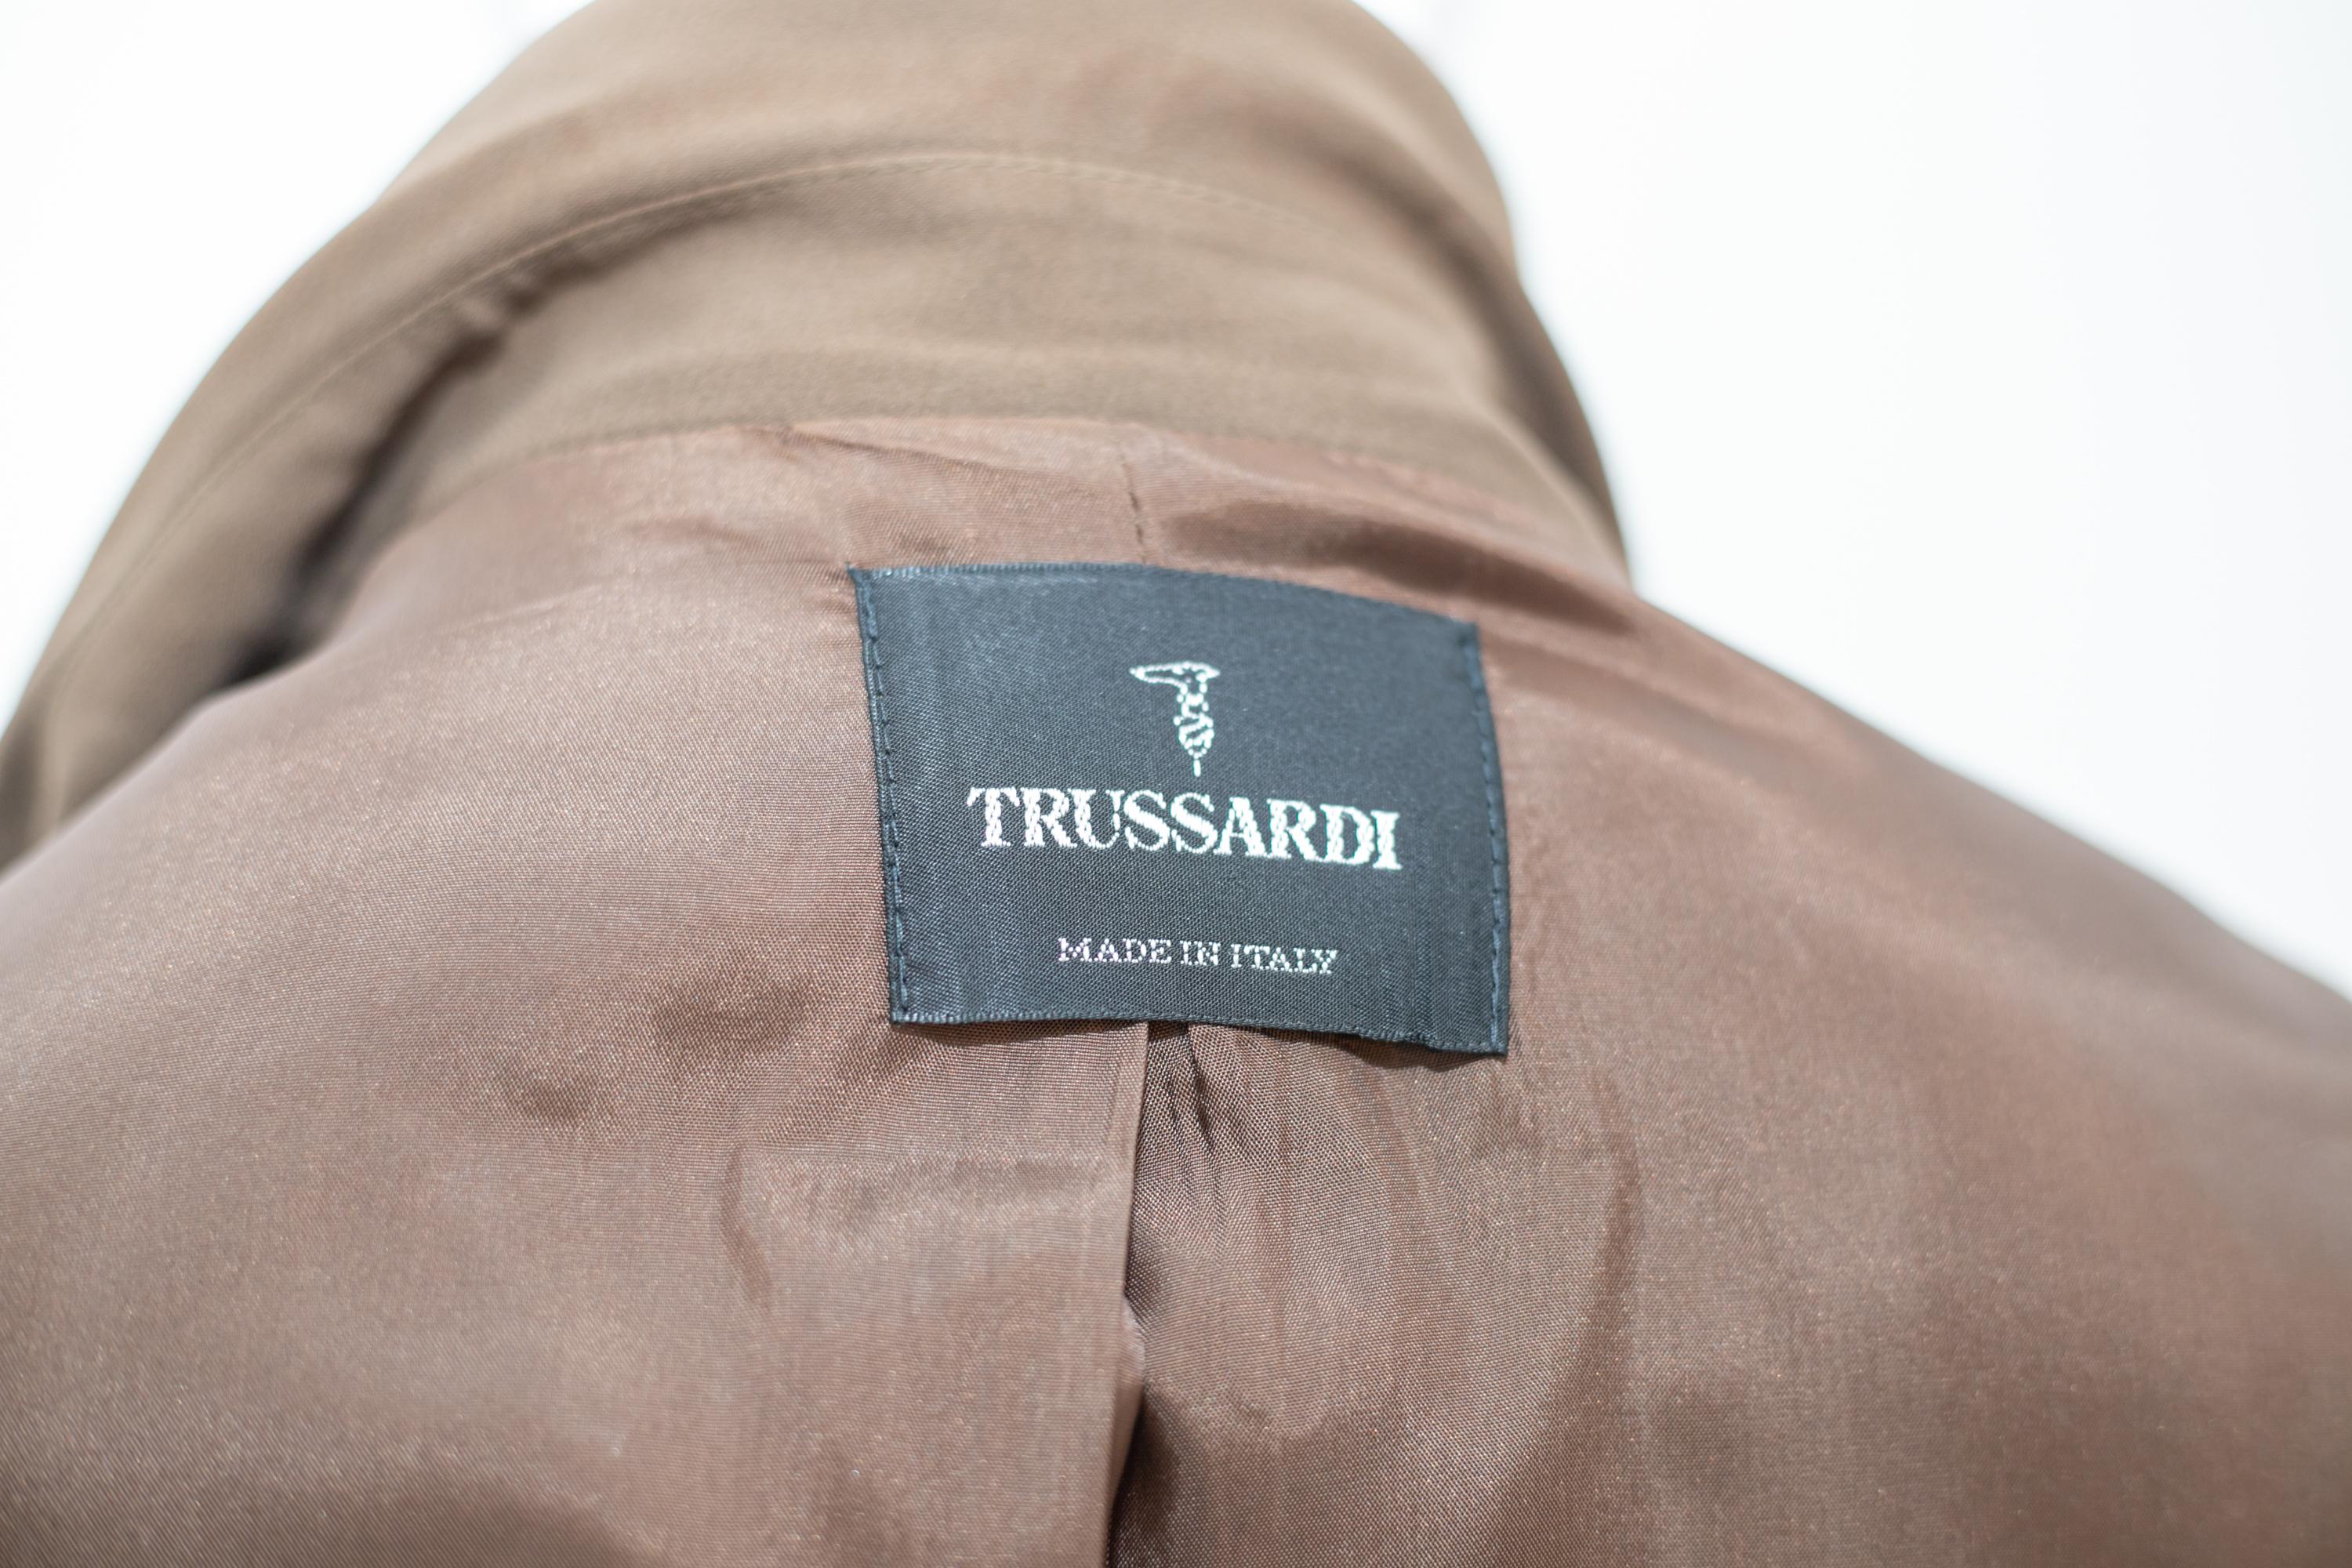 Elegant and sporty long blazer jacket of Italian manufacture TRUSSARDI 90's. The long blazer is made with 55% viscose and 45% acetate to make the jacket very soft. The particularity of the jacket is in its soft double-breasted created by the waist